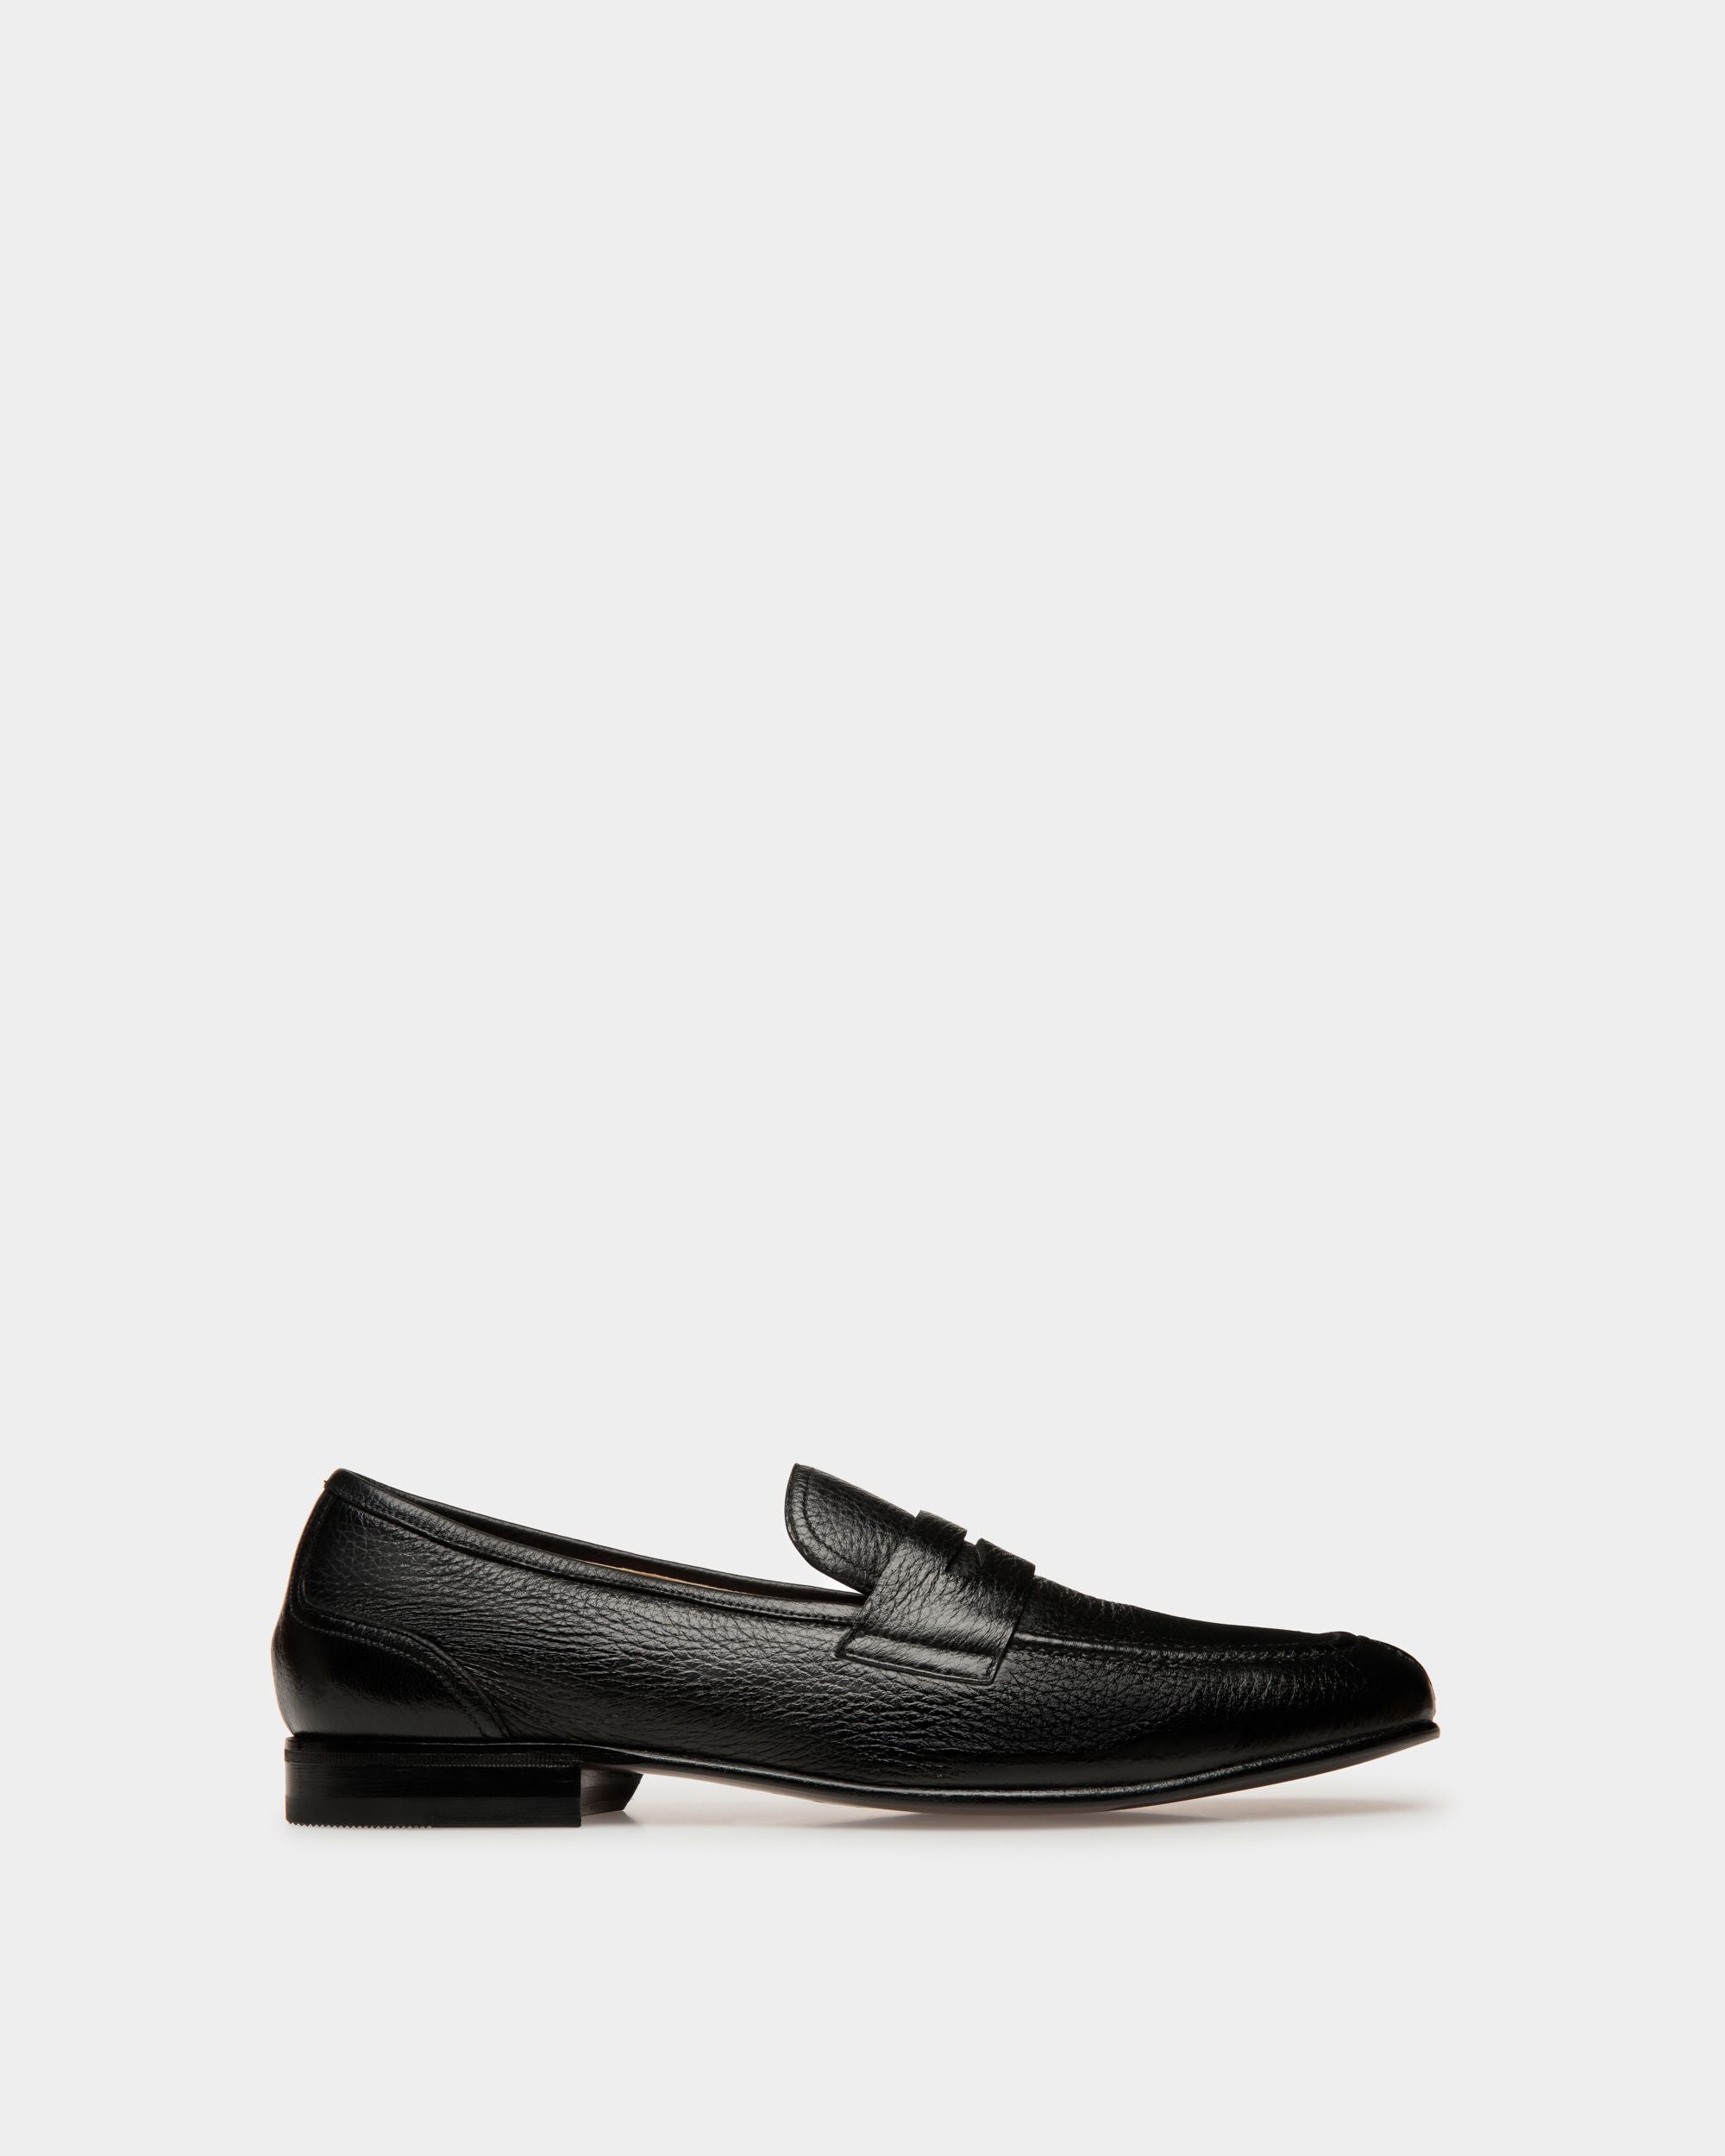 The Favorites: Men's Dresses, Shoes & Bags for gifts | Bally